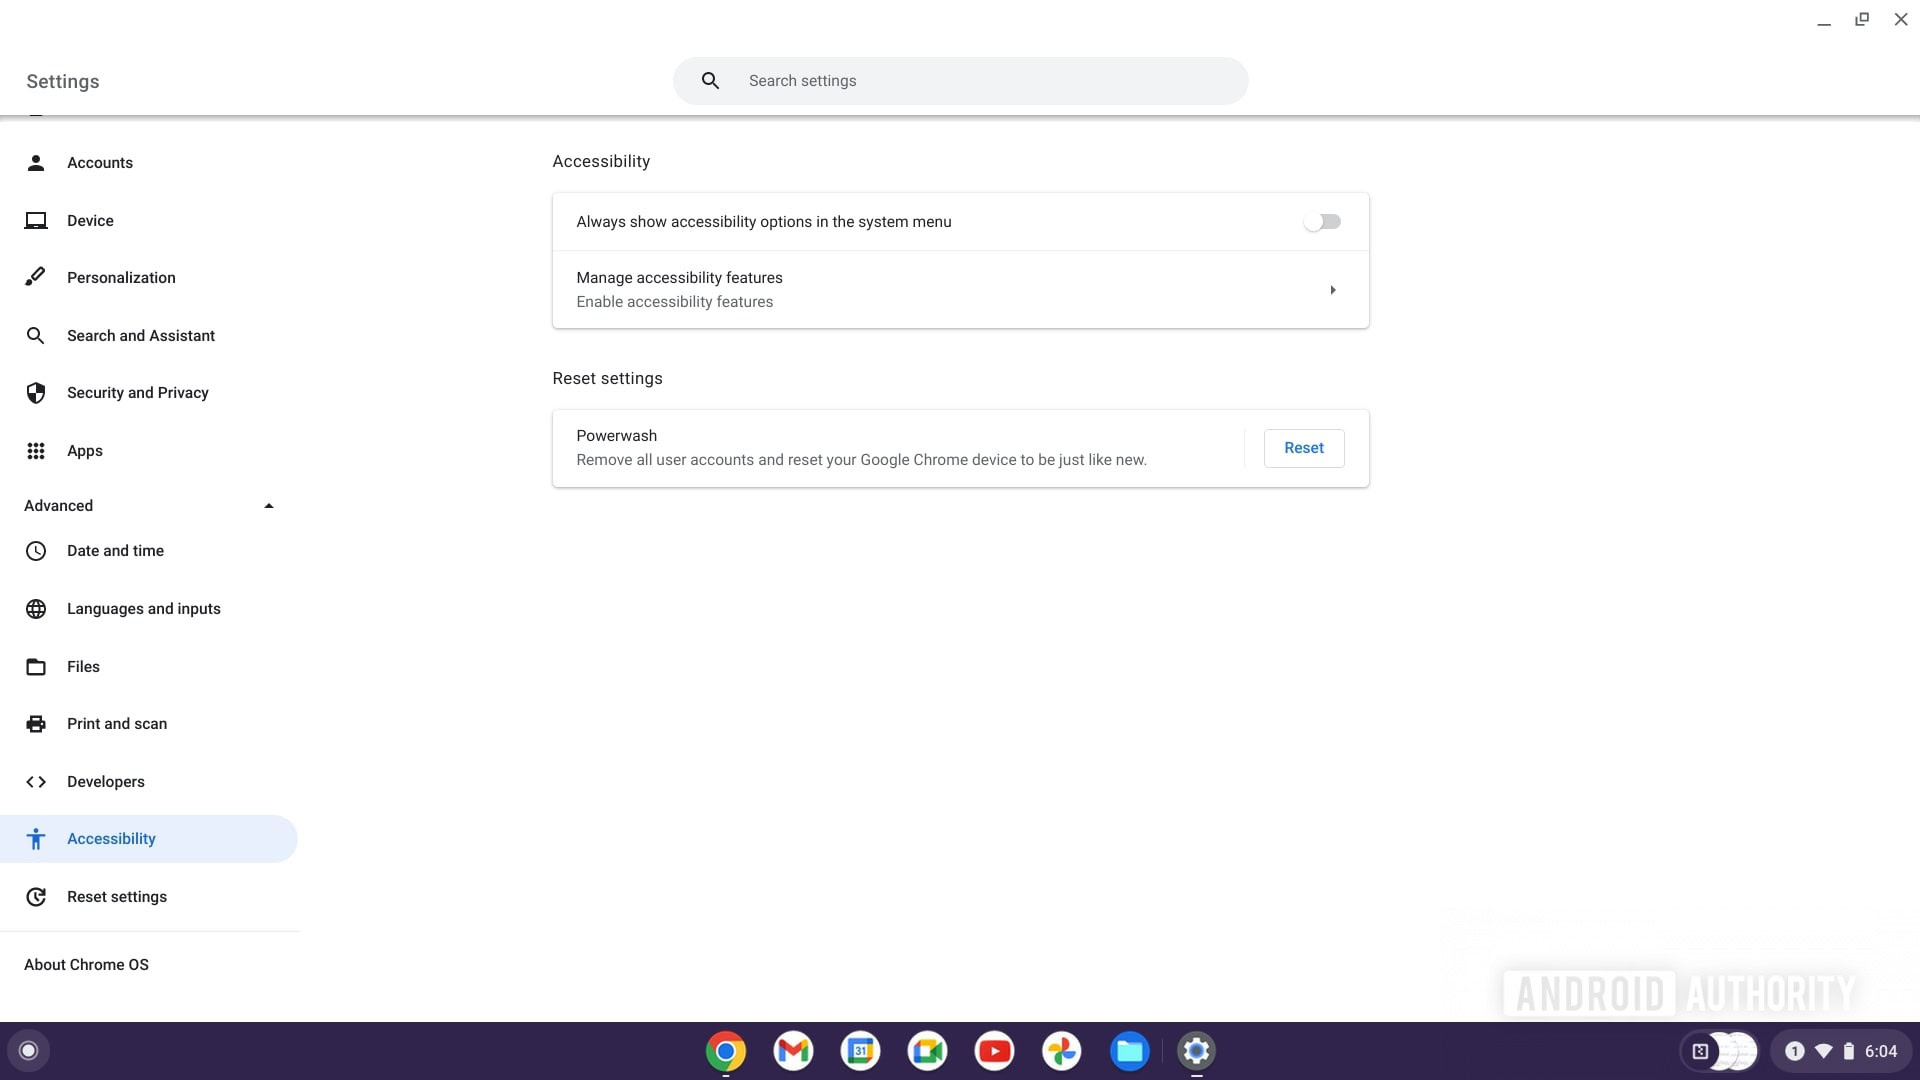 Chromebook invert colors manage accesibility settings